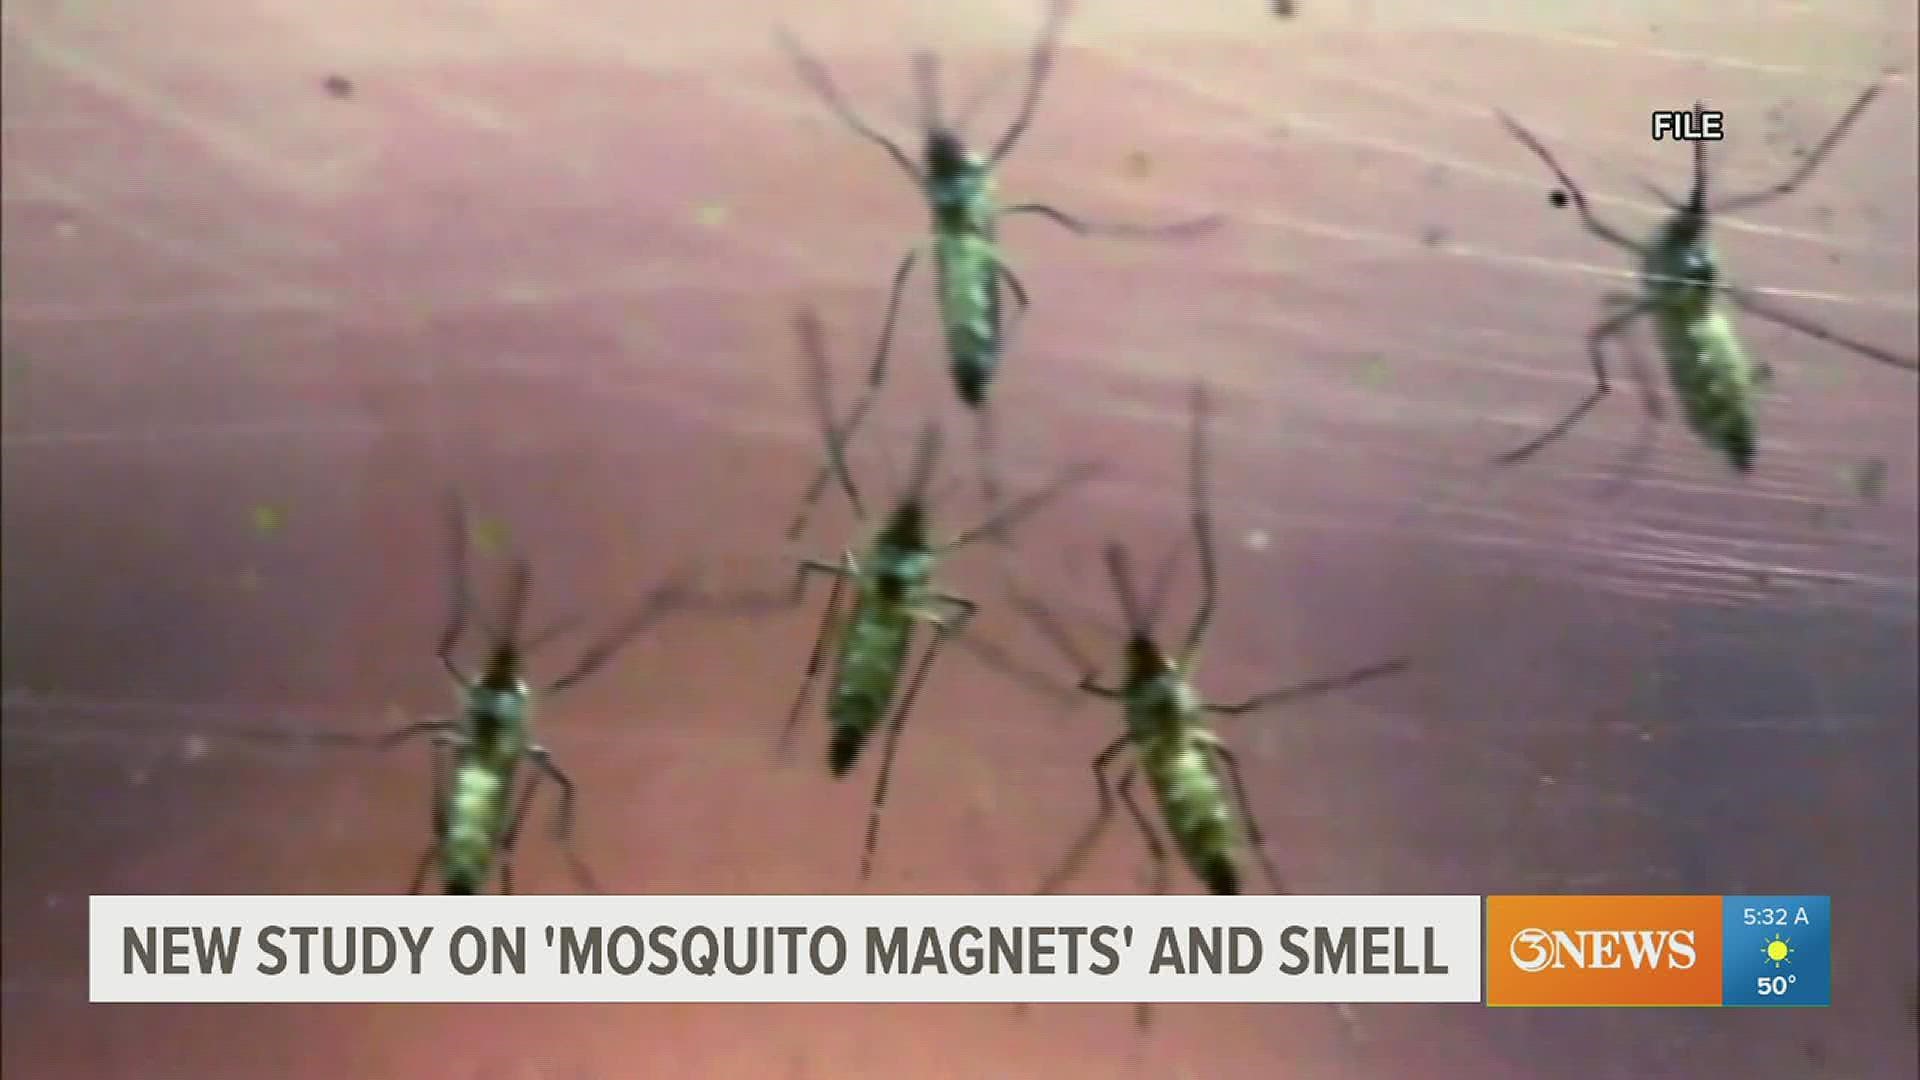 A new study discovered a link between a person's smell and their susceptibility to attracting mosquitos.